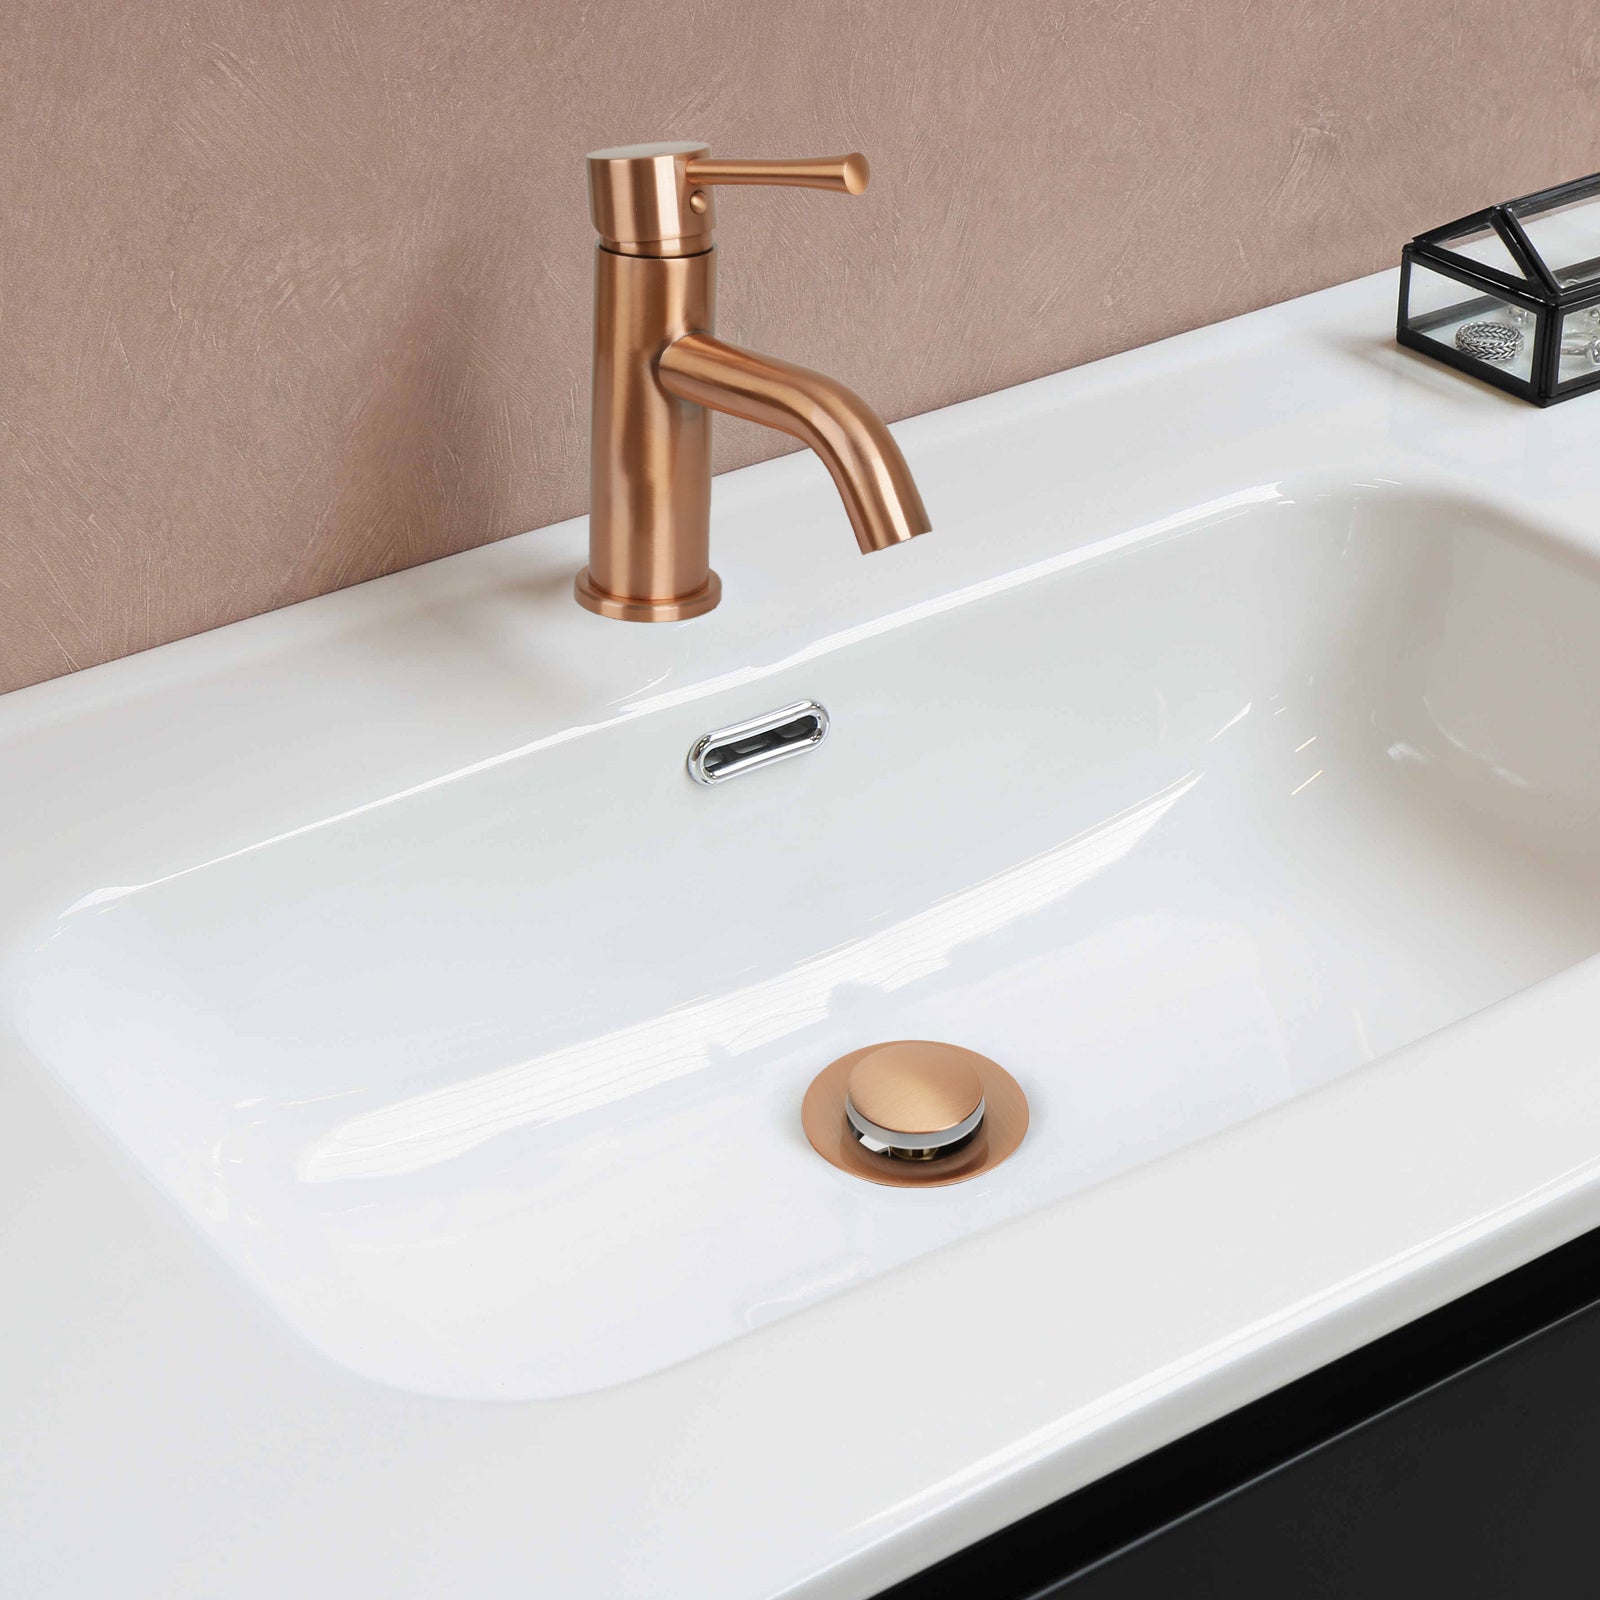 Copper Pop up Drain Stopper With Overflow - AK82003C